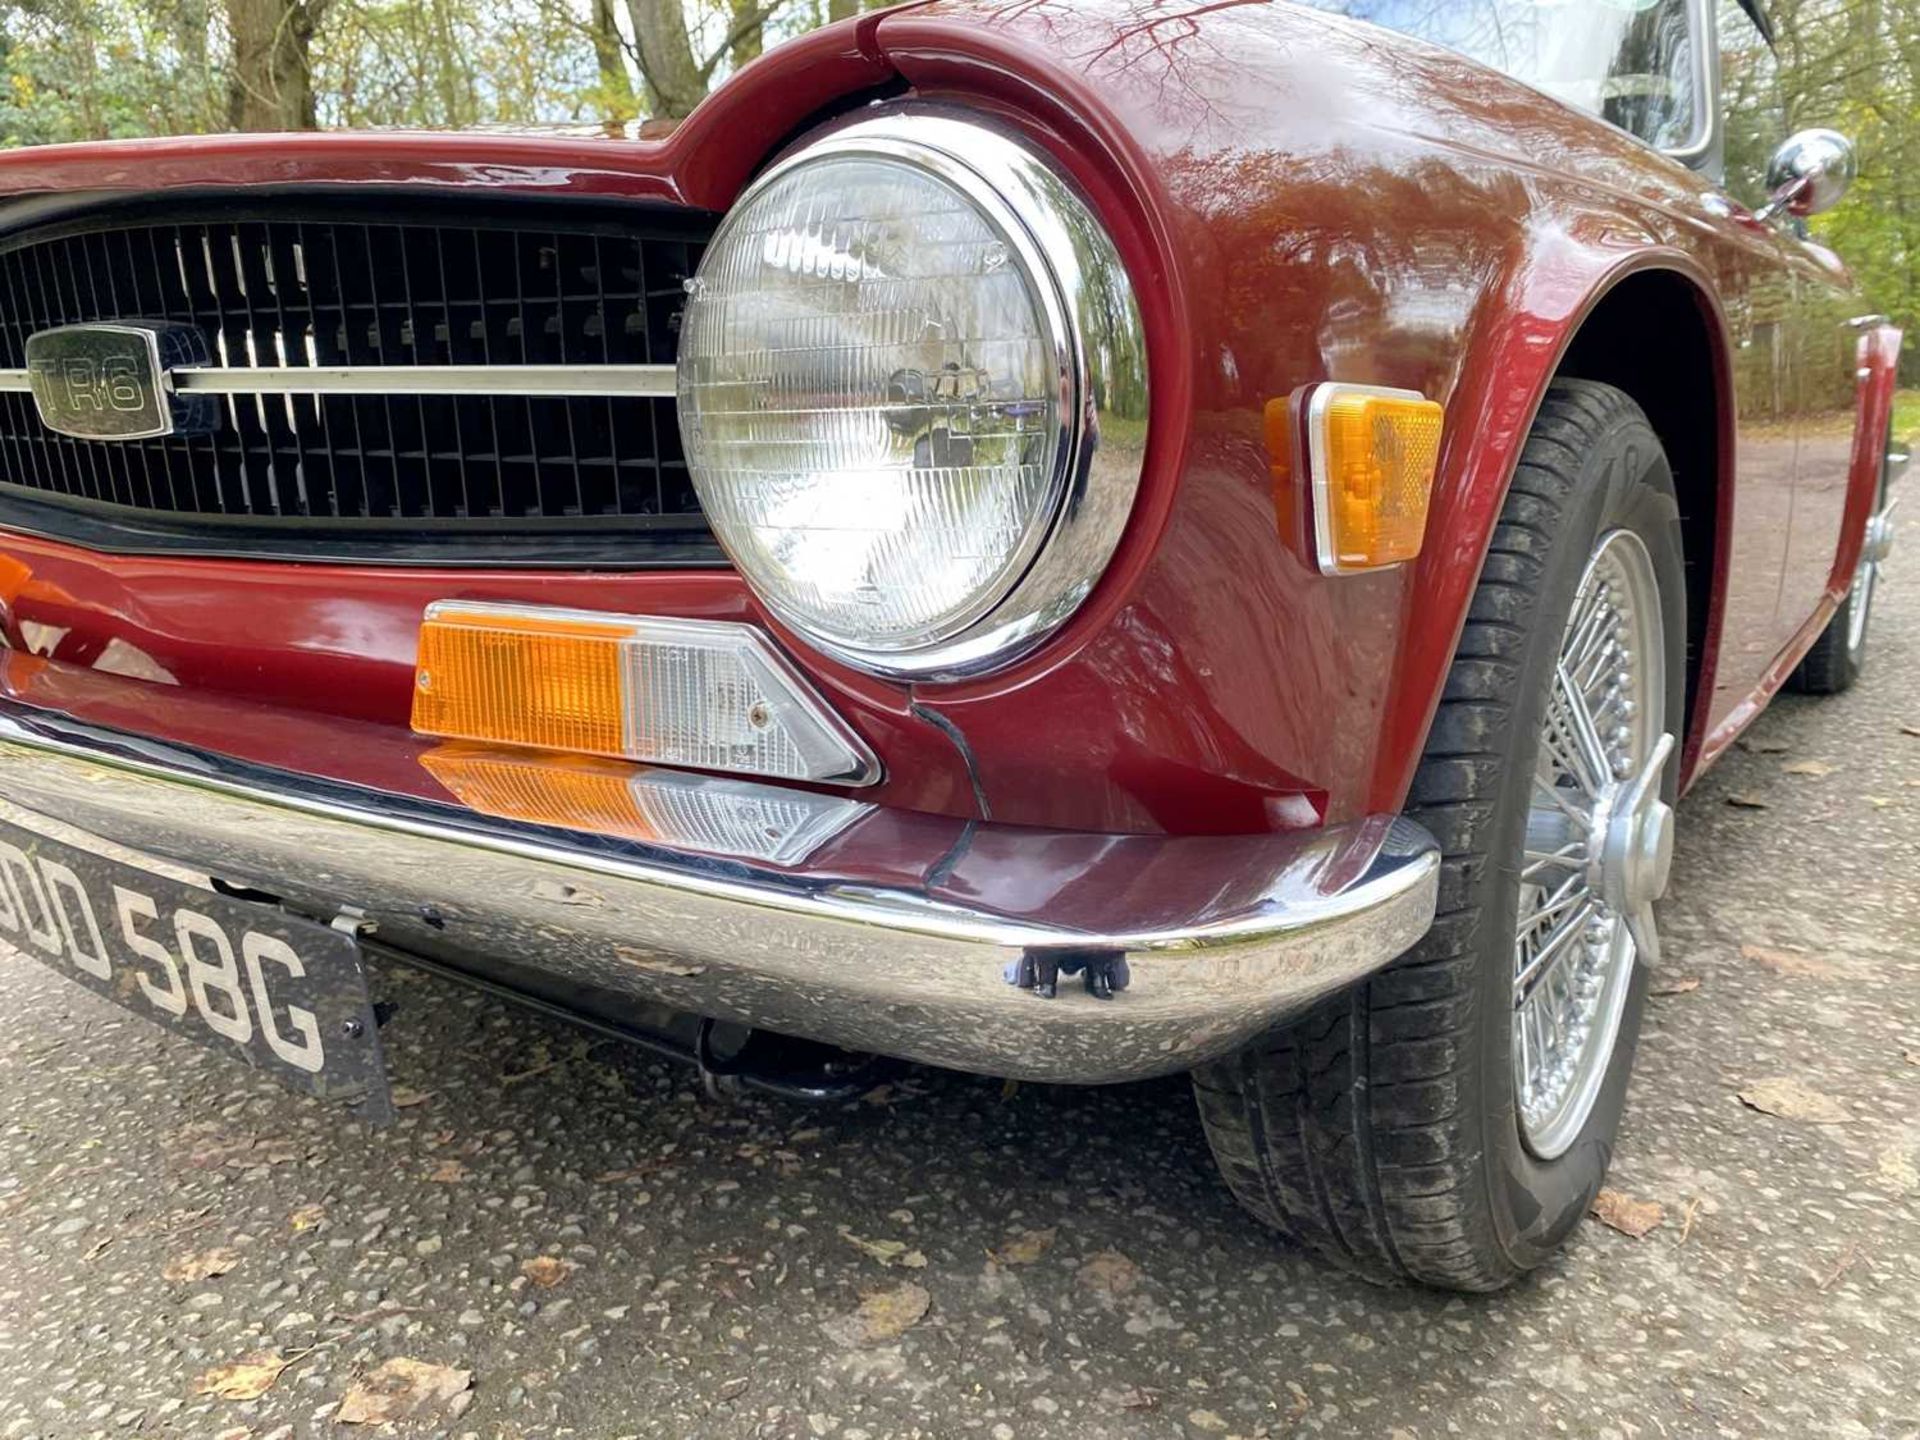 1969 Triumph TR6 Desirable early example - Image 84 of 100